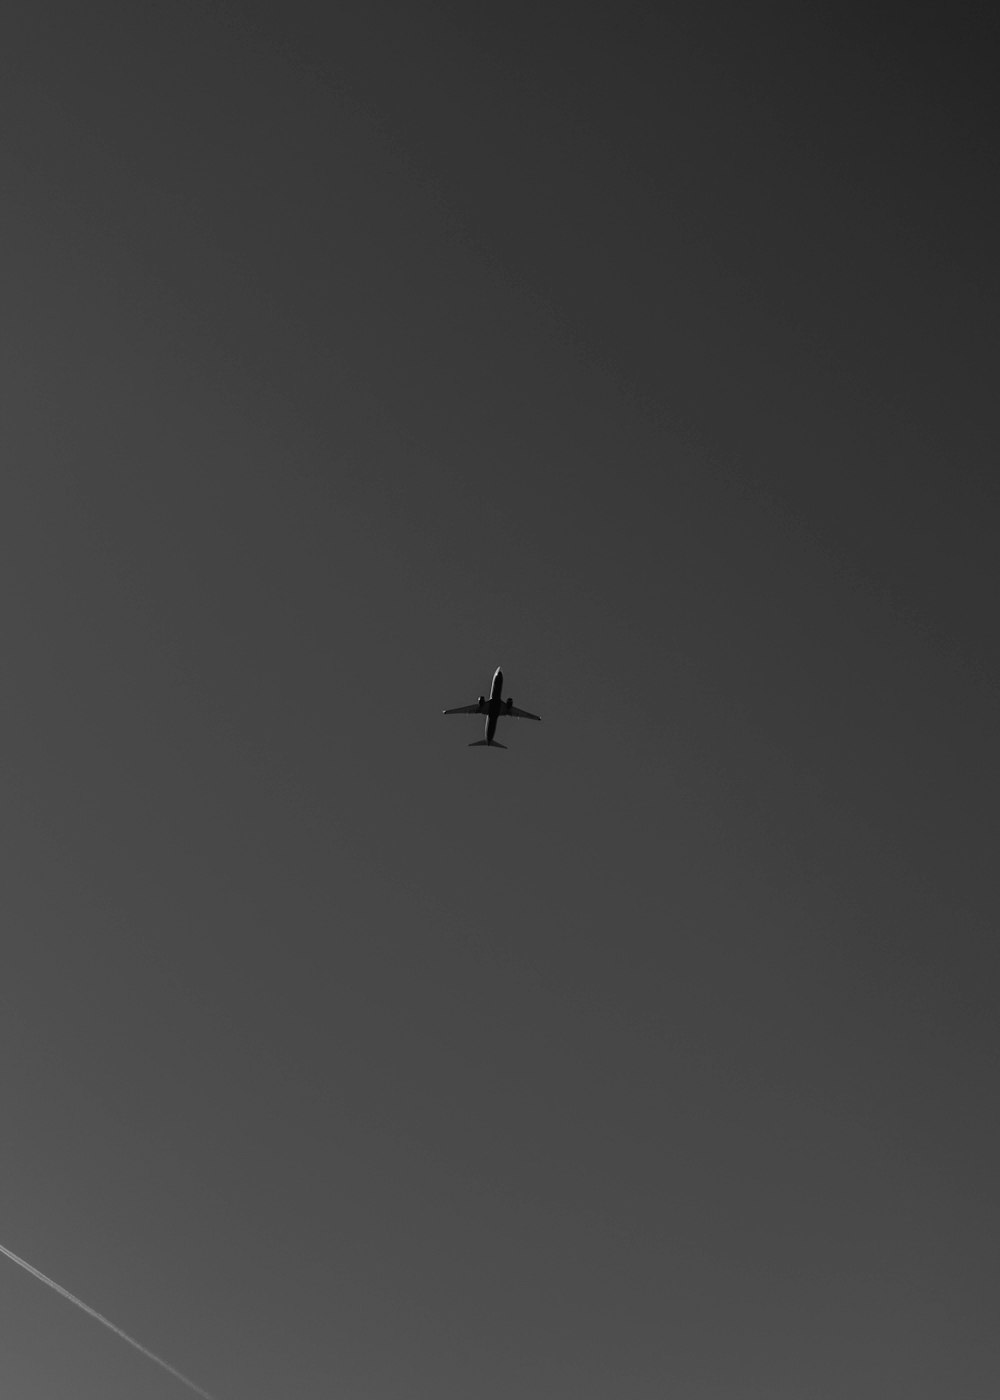 a black and white photo of an airplane in the sky